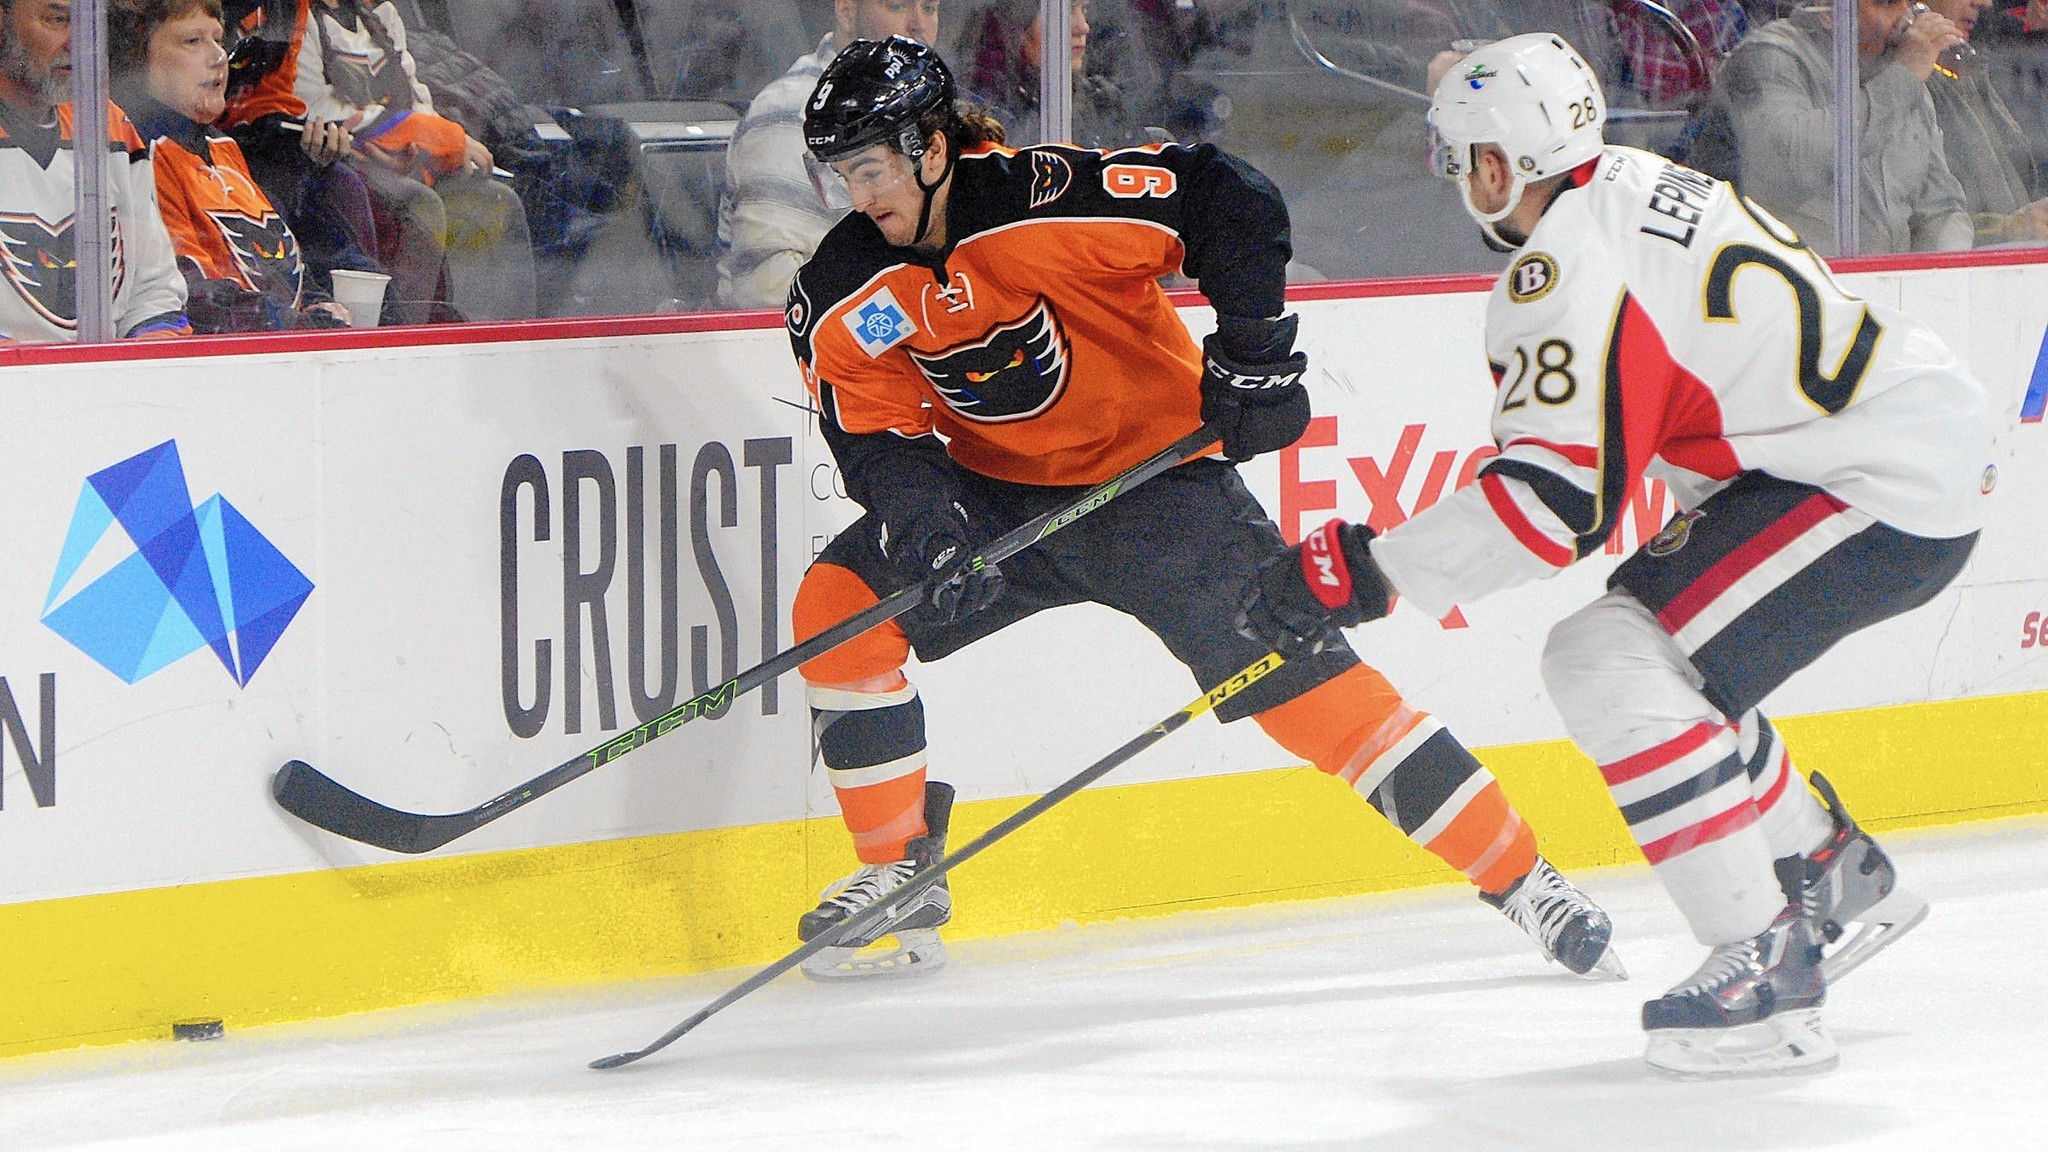 Lehigh Valley Phantoms: Hockey action returns to Allentown - The Morning Call